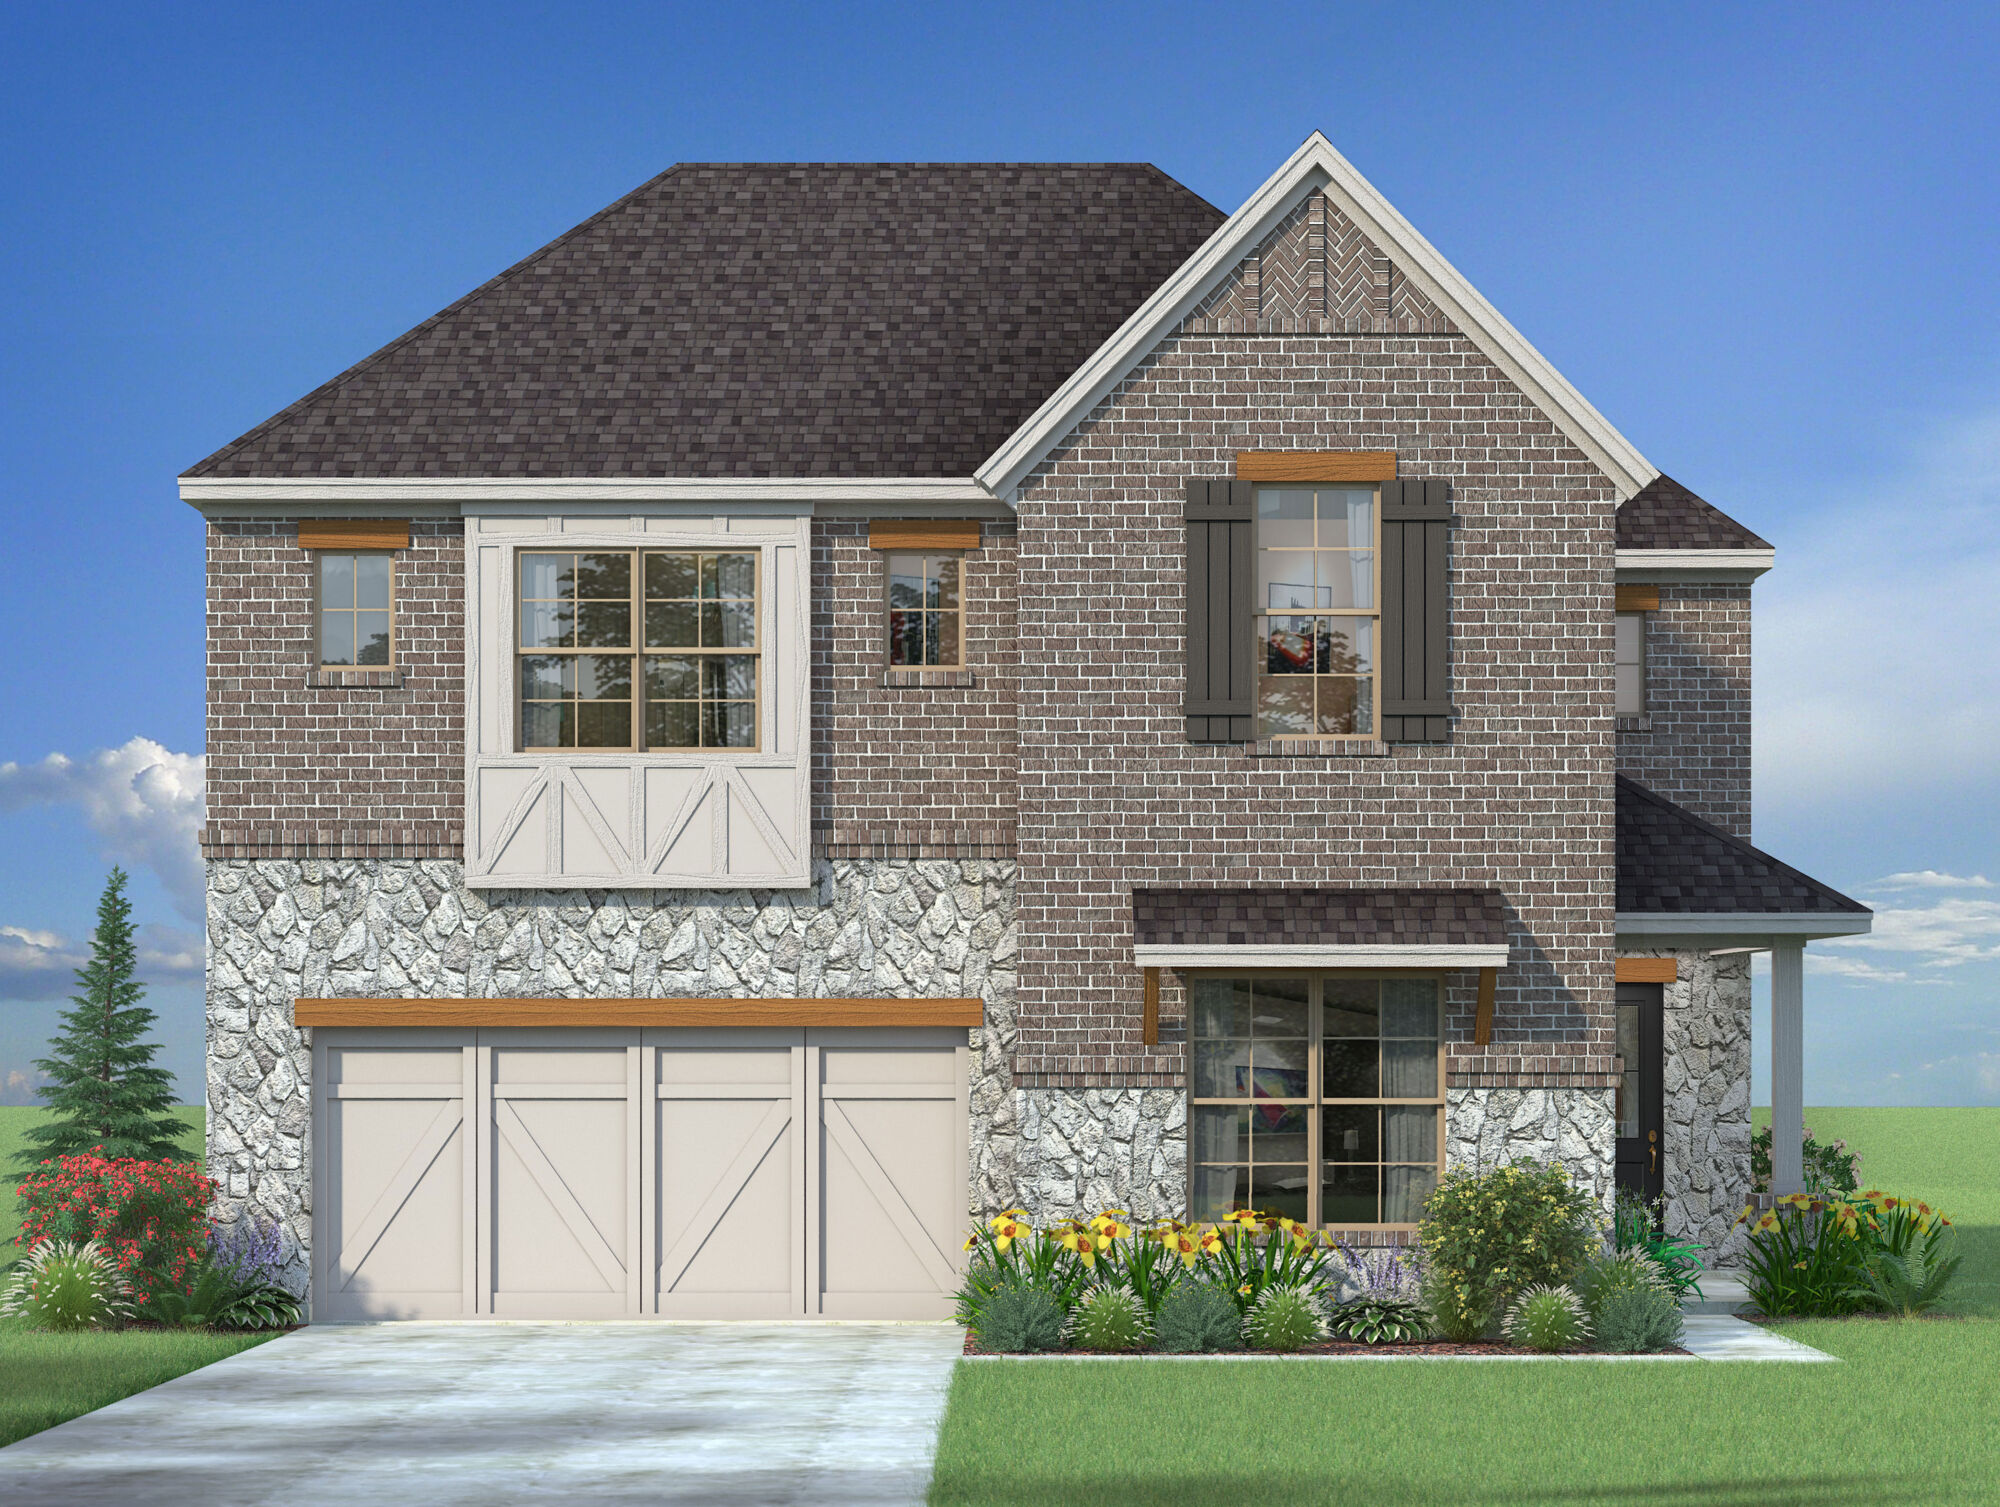  Elevation Front with window, garage, exterior brick and exterior stone